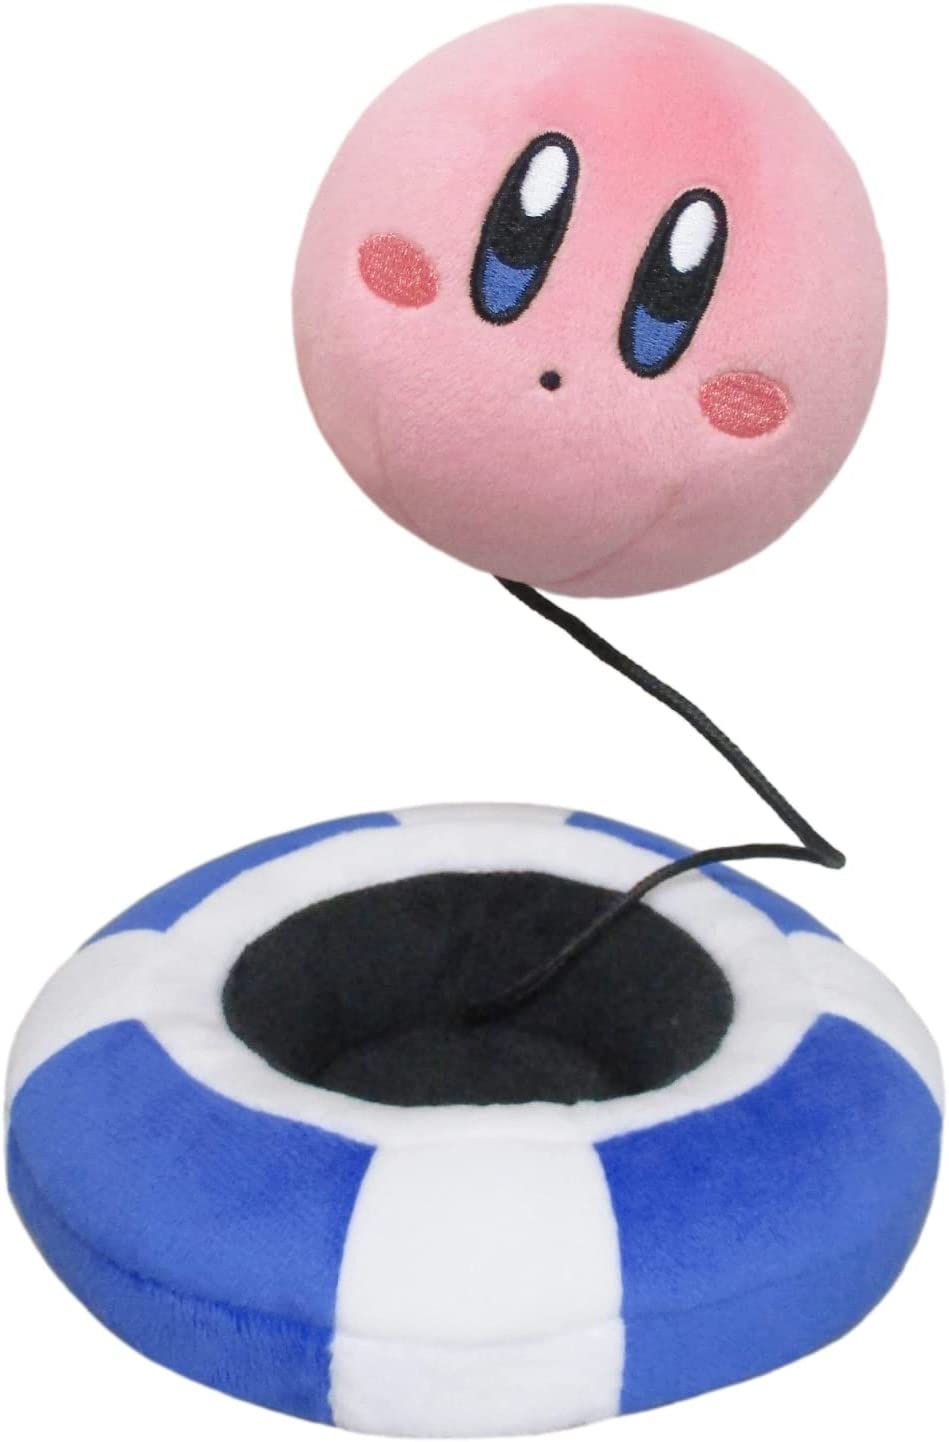 Hole in One KIRBY Launch 30th Anniversary Sanei Plush Toy (3.7 in - 9.5 cm) NEW